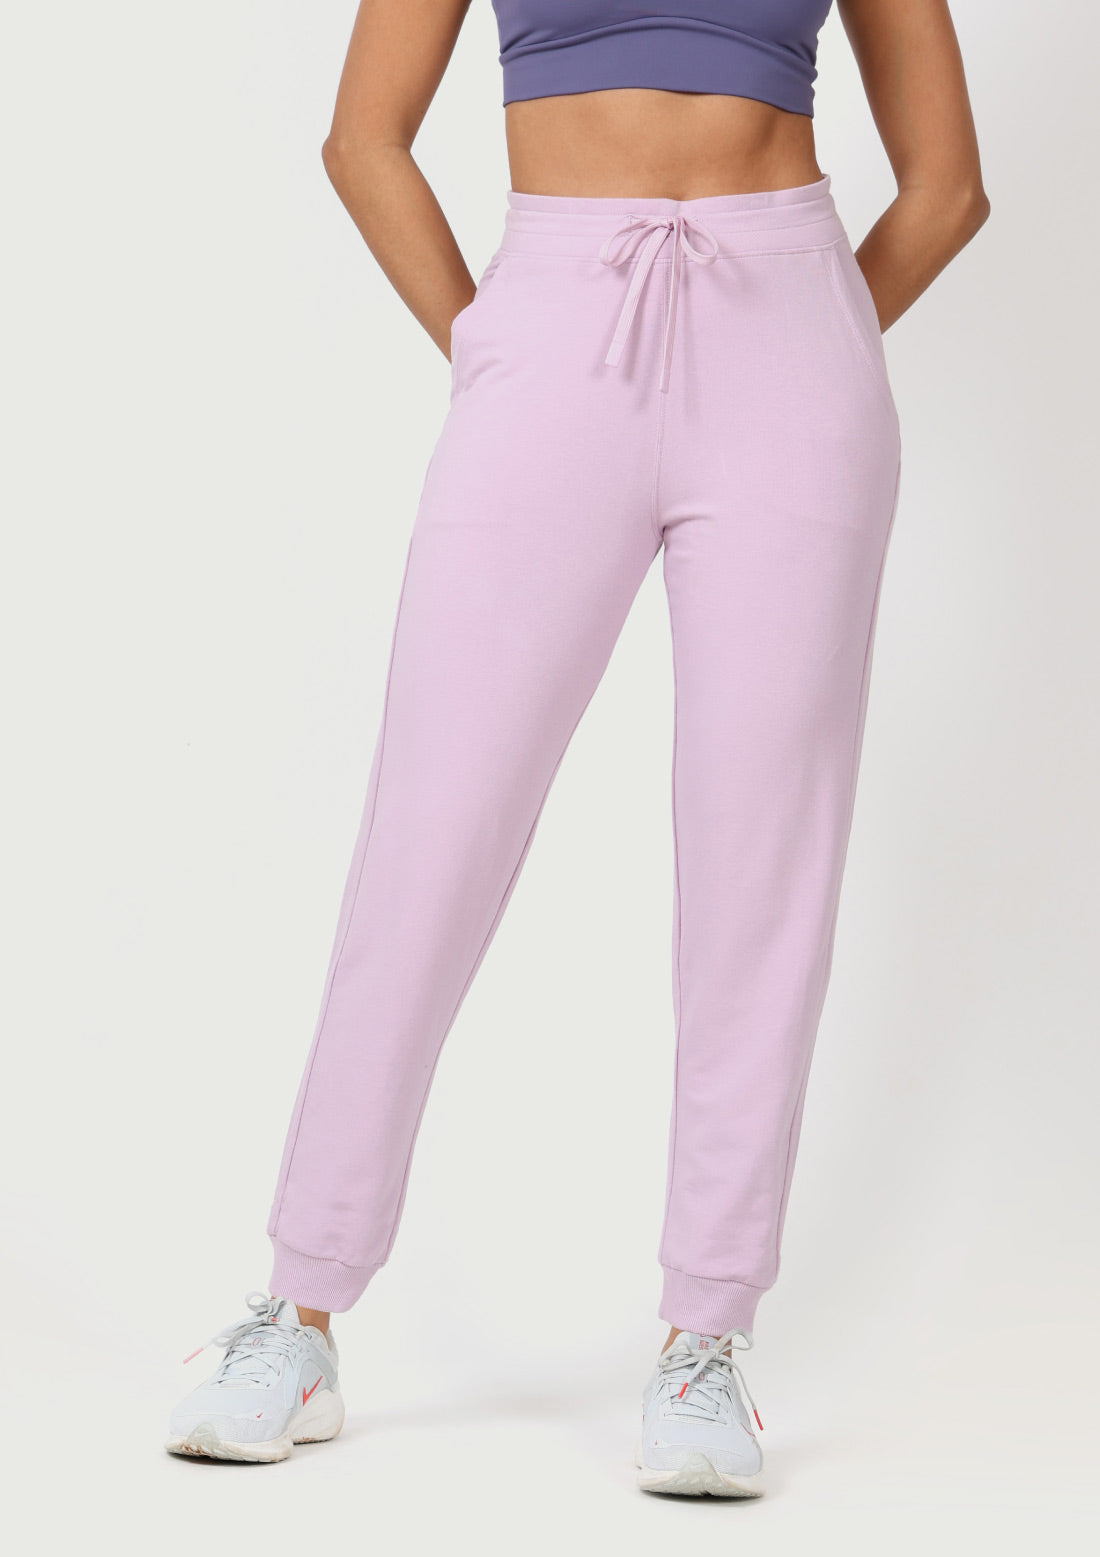 Buy Cotton Joggers for Women Online from Blissclub